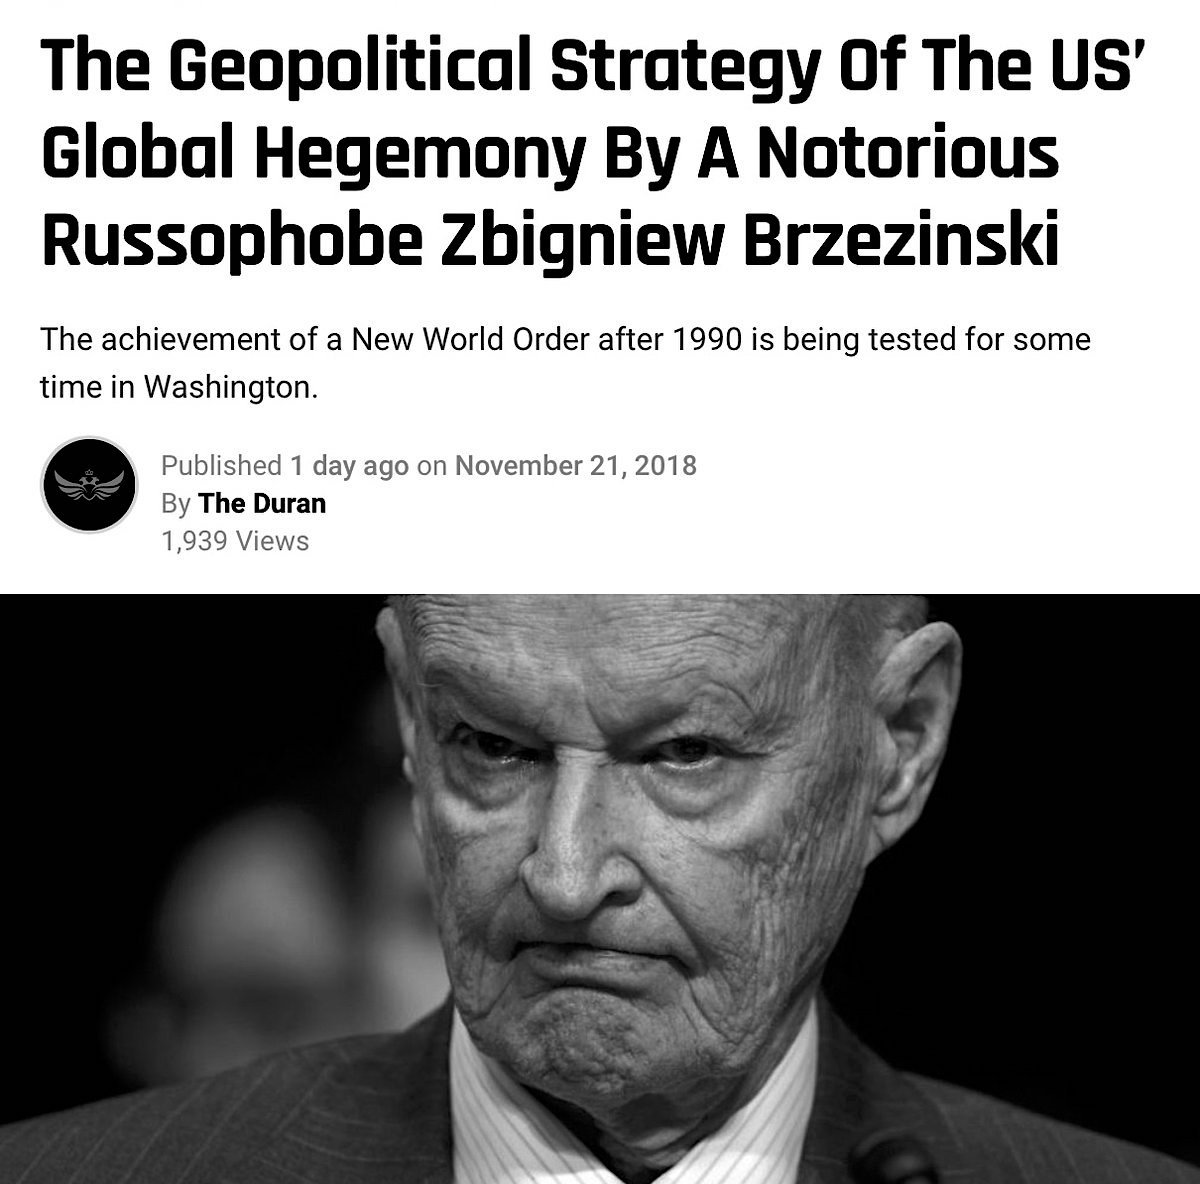 Brzezinski Was A Senior Adviser To President-Elect Barry Soetoro On Matters Of National Security And Foreign Policy, And Probably Guided Barry, Eagerly Aided By Valerie June Jarrett, Through His Entire Presidency To Achieve The Goal Of Their Masters. https://theduran.com/the-geopolitical-strategy-of-the-us-global-hegemony-by-a-notorious-russophobe-zbigniew-brzezinski